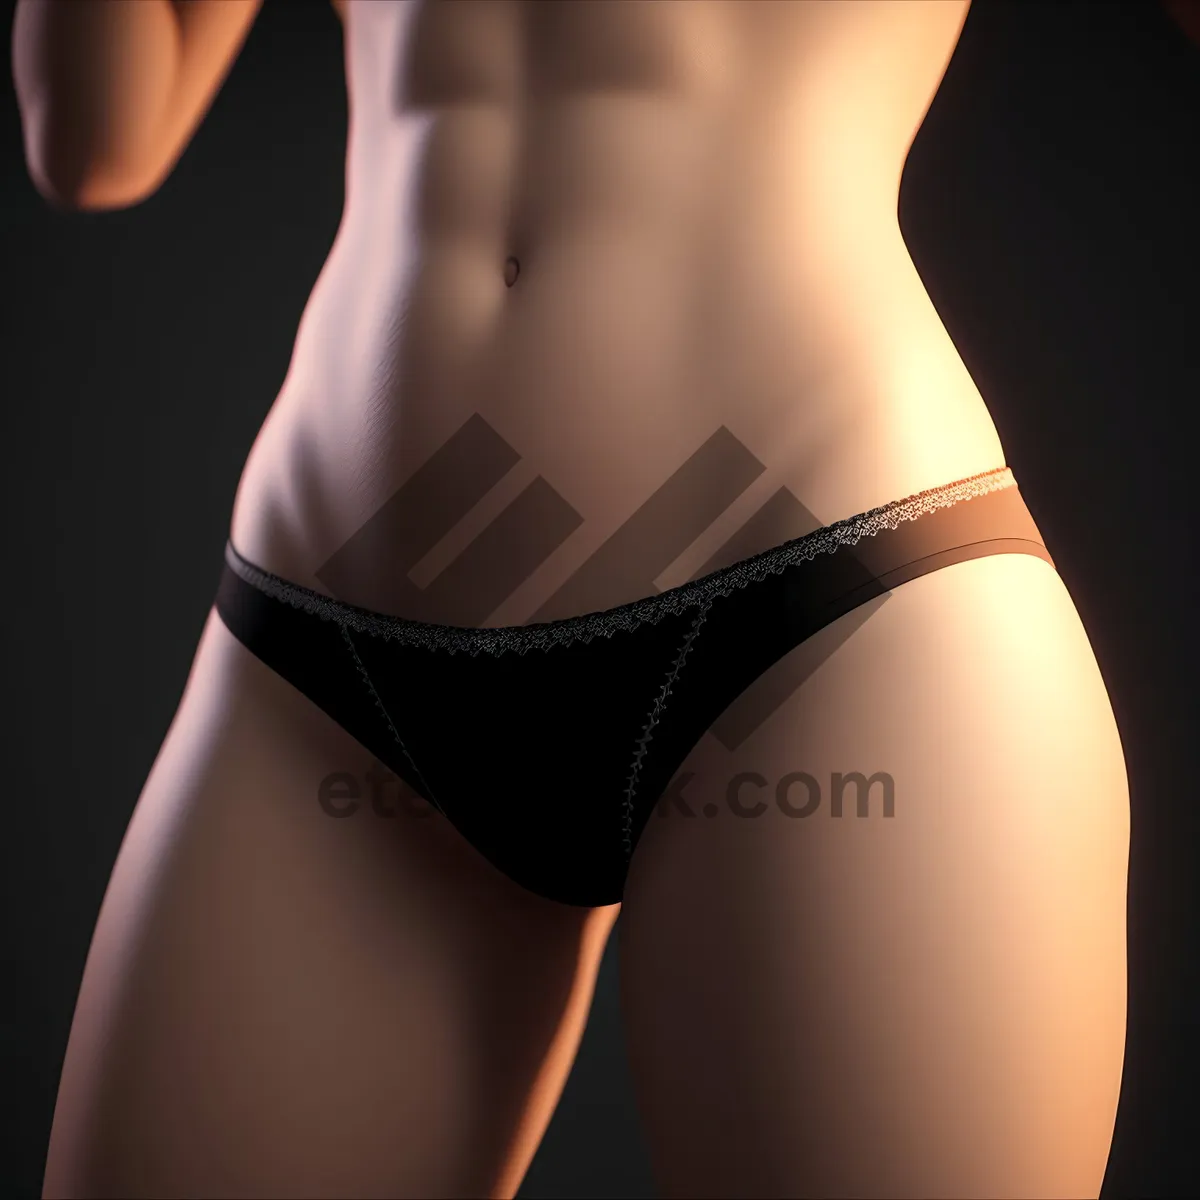 Picture of Slender Sensuality: Seductive Black Panties Accentuate Attractive Waist